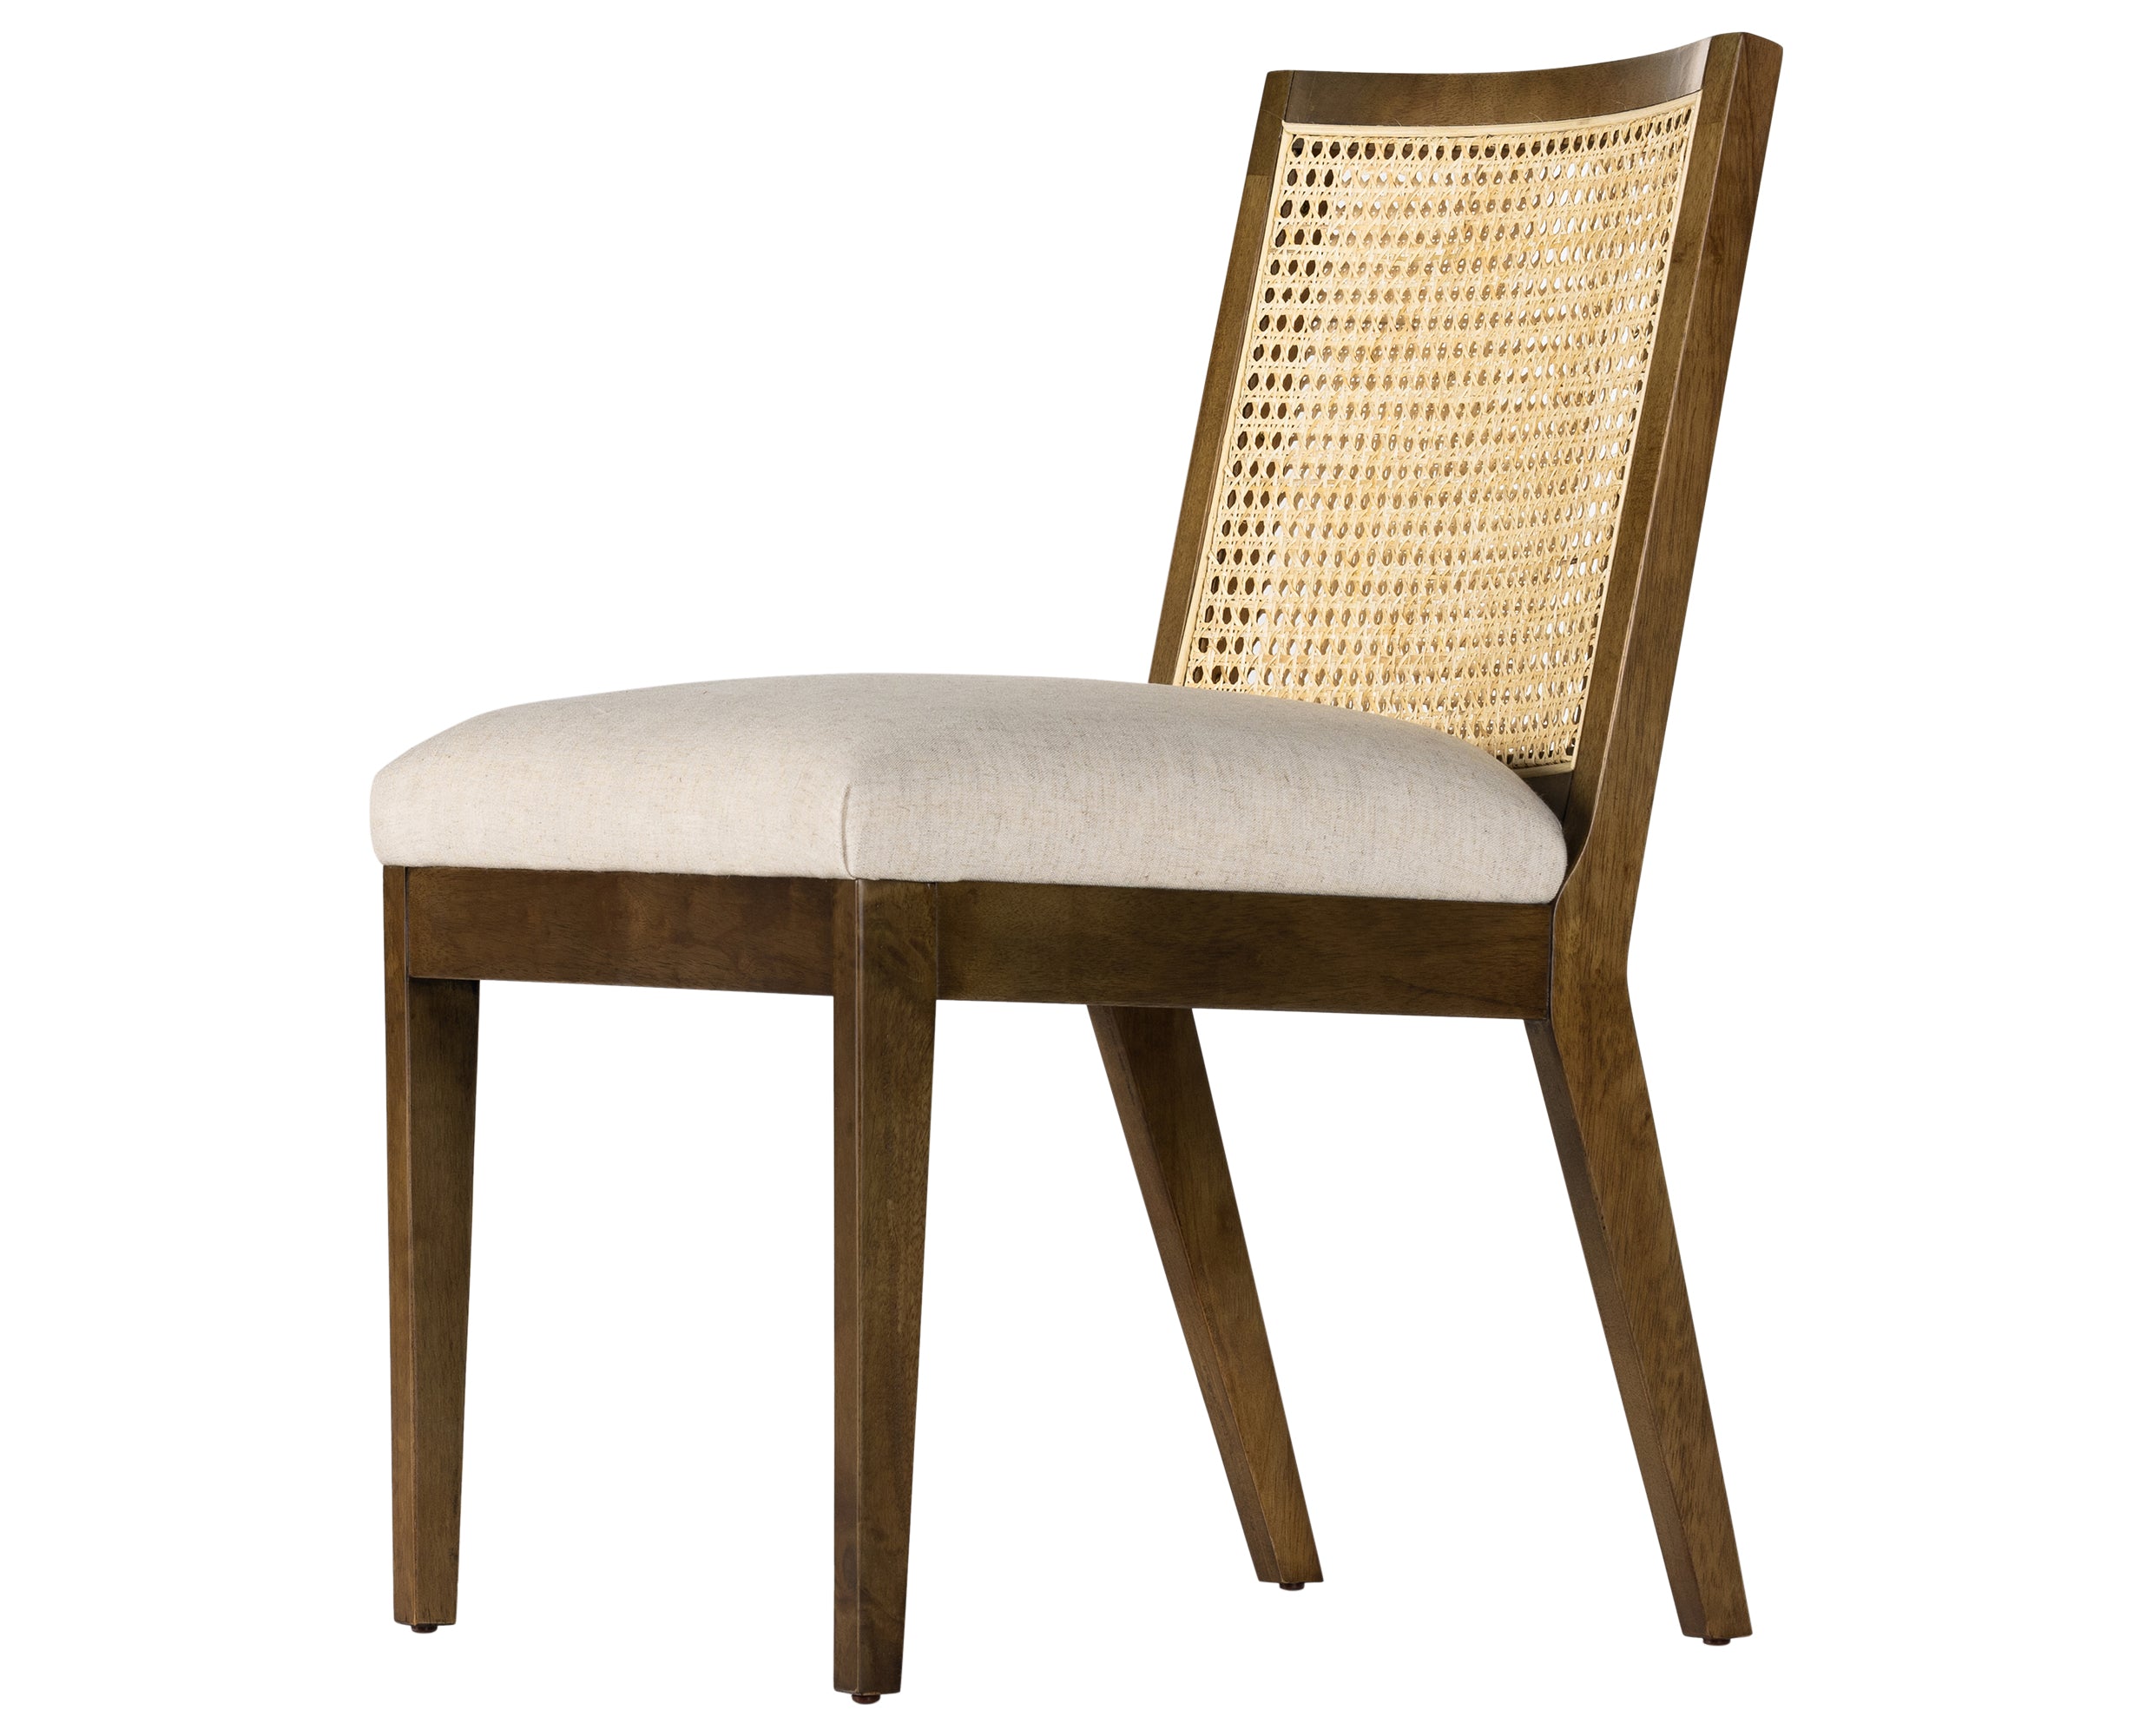 Savile Flax Fabric and Toasted Parawood with Light Natural Cane | Antonia Cane Armless Dining Chair | Valley Ridge Furniture